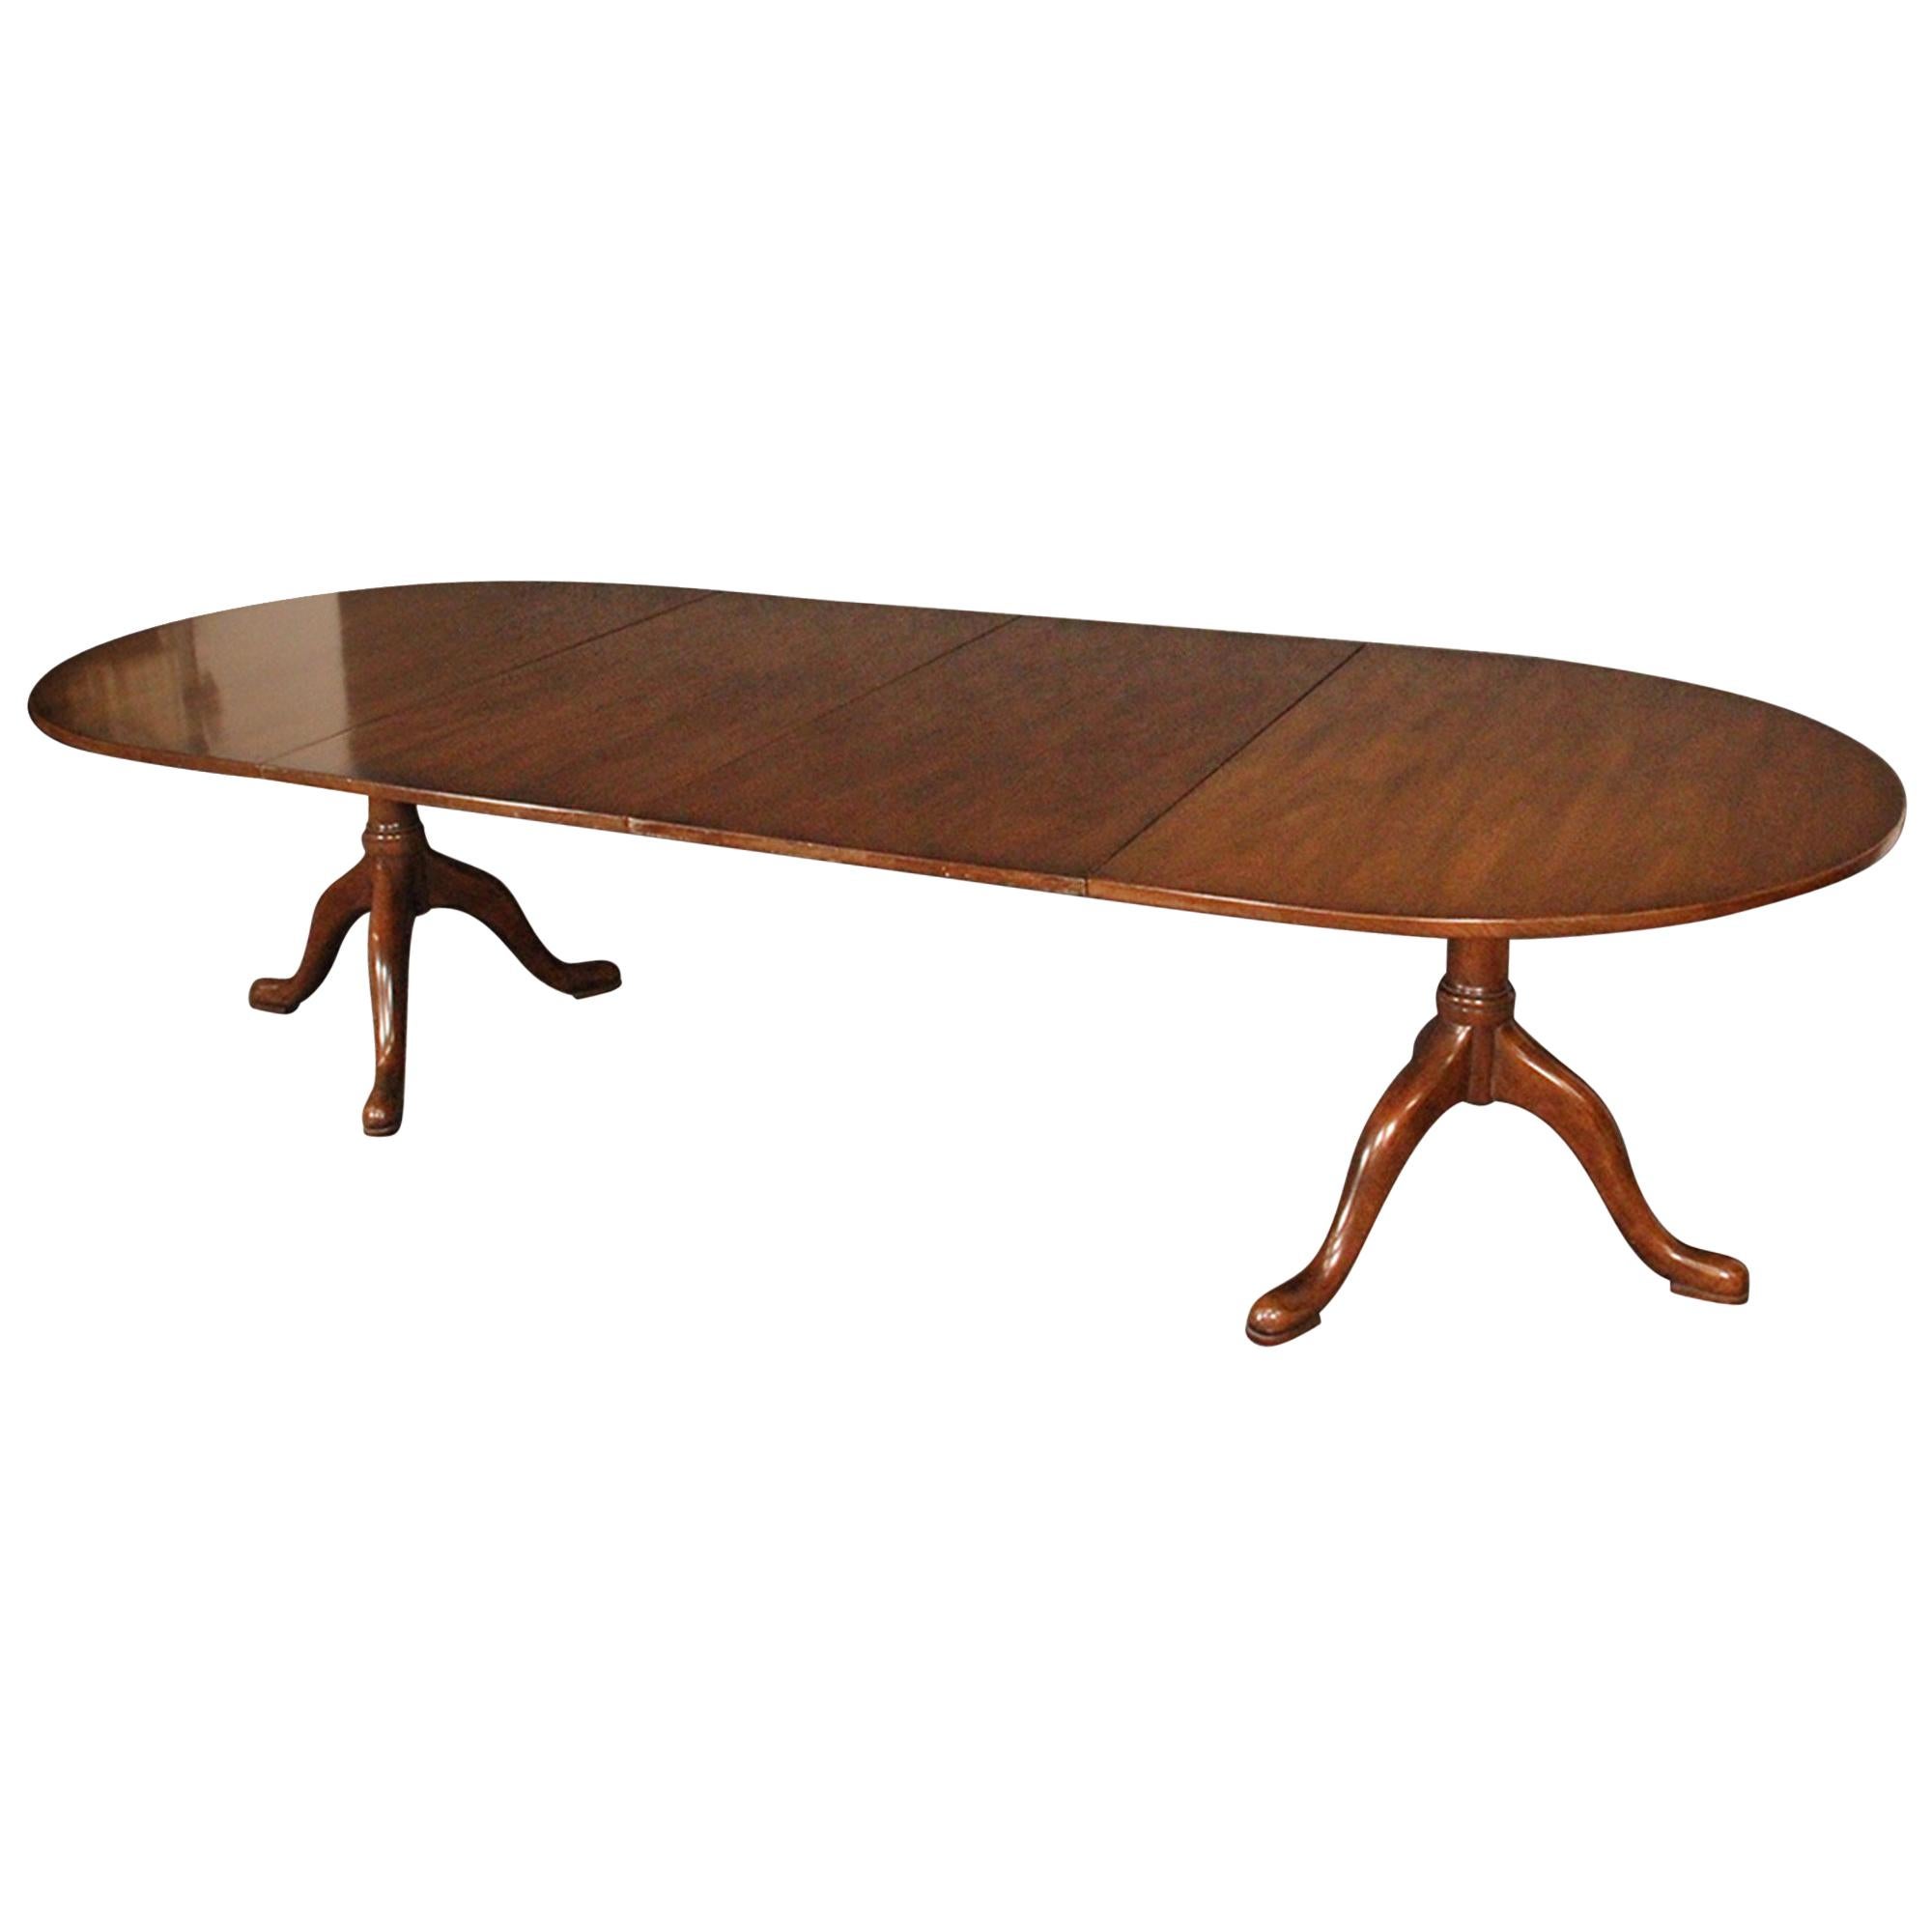 Kittinger CW Solid Mahogany Georgian Queen Anne Style Dining Table with 2 Leaves